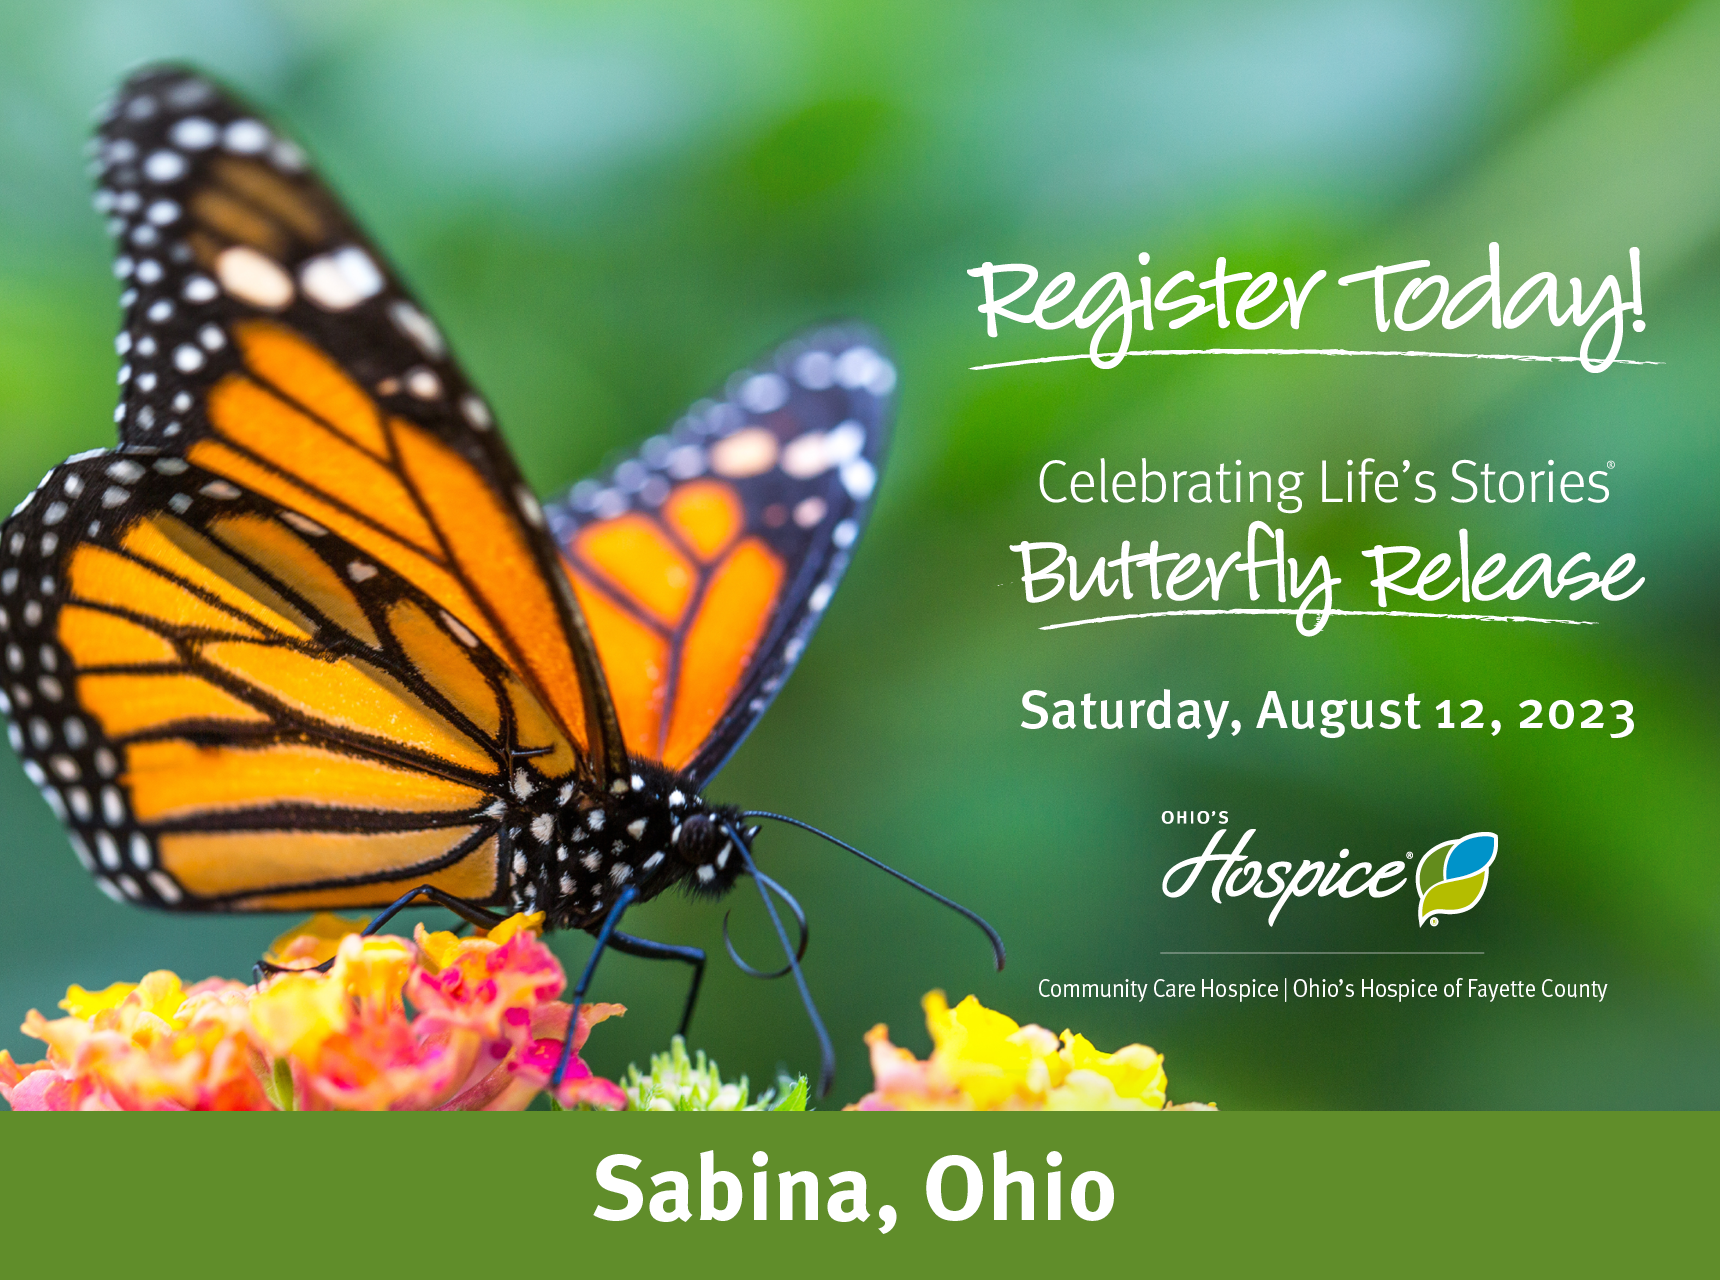 Register Today! Celebrating Life's Stories Butterfly Release. Saturday, August 12, 2023. Ohio's Hospice. Community Care Hospice. Ohio's Hospice of Fayette County. Sabina, Ohio